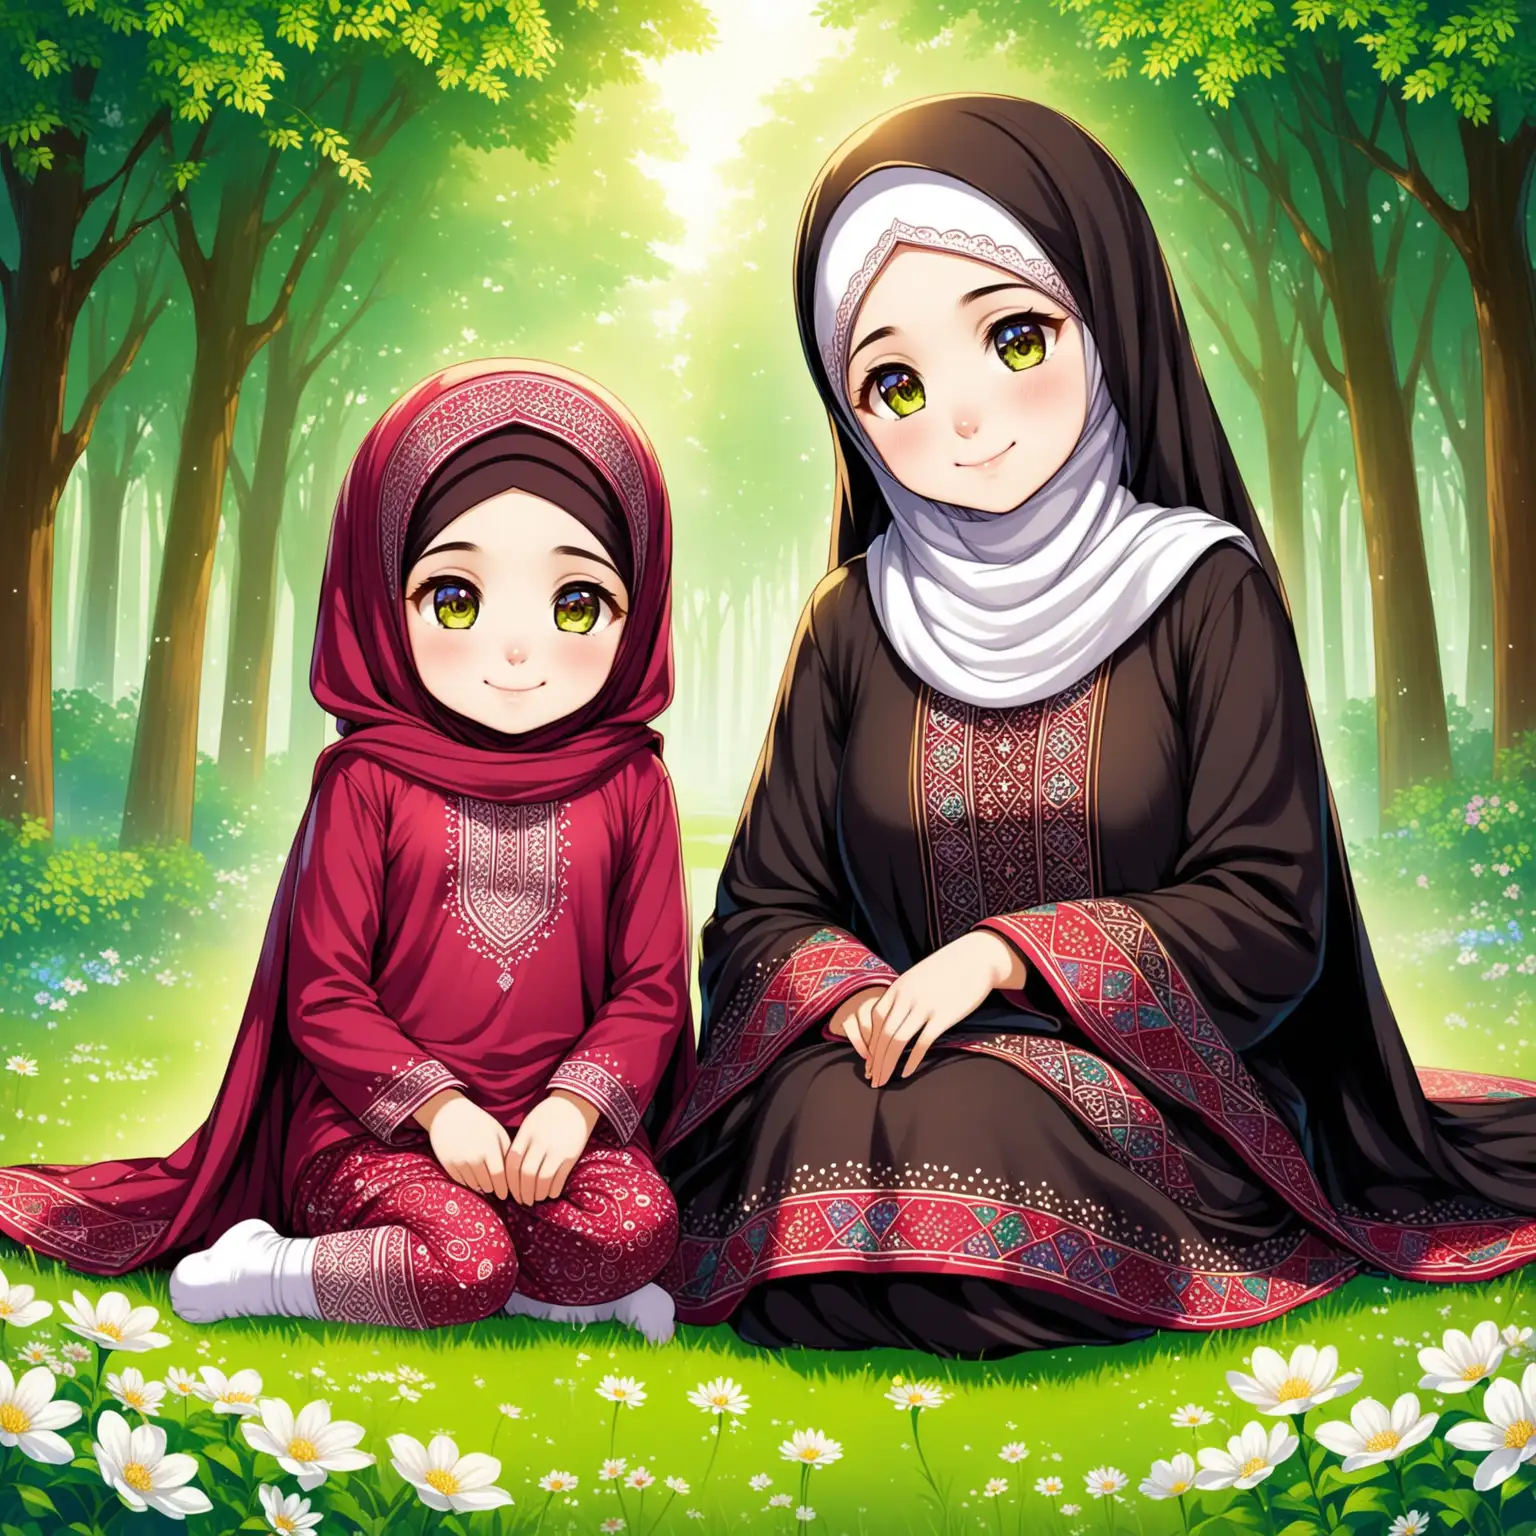 Character 8 years old Persian girl(full height, Muslim, with emphasis no hair out of veil(Hijab), smaller eyes, bigger nose, white skin, cute, smiling, wearing socks, clothes full of Persian designs) named Fatemeh.
Mother of Fatemeh's name is Roqayeh, Roqayeh is wearing chador, veil.
Fatemeh is sitting with her mother Roqayeh politely.

Atmosphere forest, grass flowers, etc...